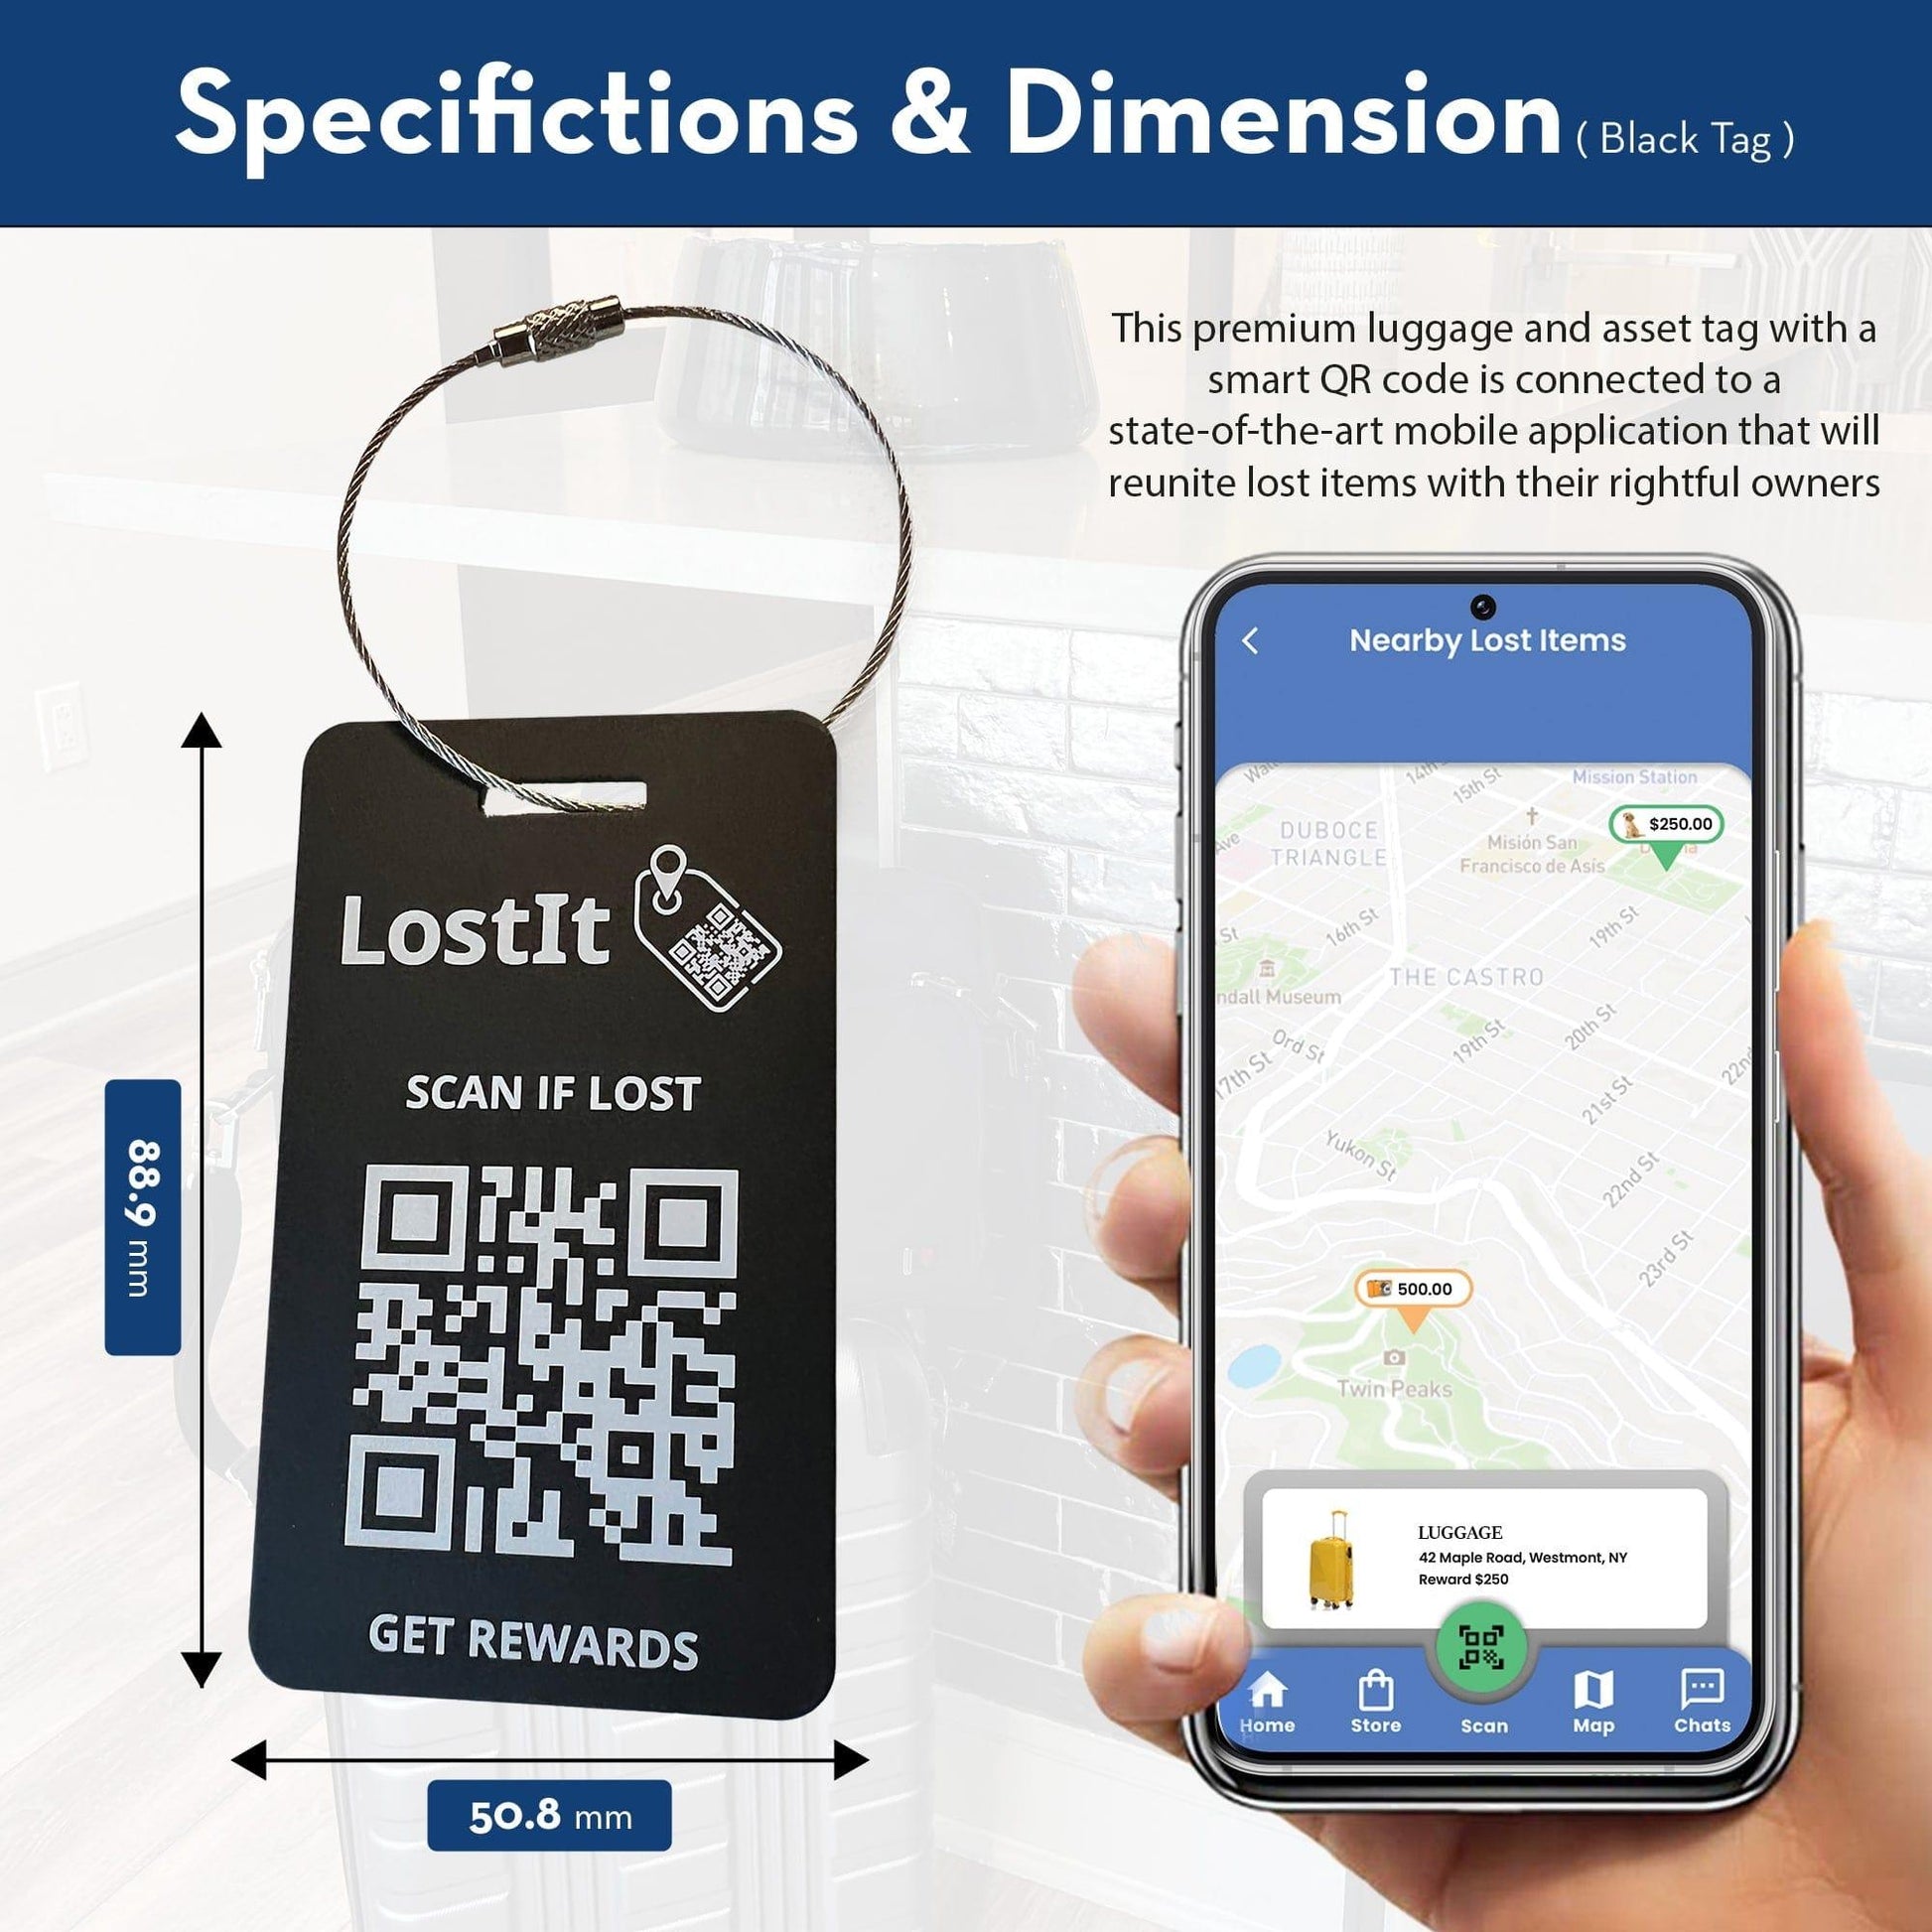 This premium luggage and asset tag with a smart QR code is connected to a state-of-the-art mobile application that will reunite lost items with their rightful owners. The LostIt Tag luggage tag measures 88.9mm x 508 mm. The color of the tag is black, has an alluminum attachement ring.